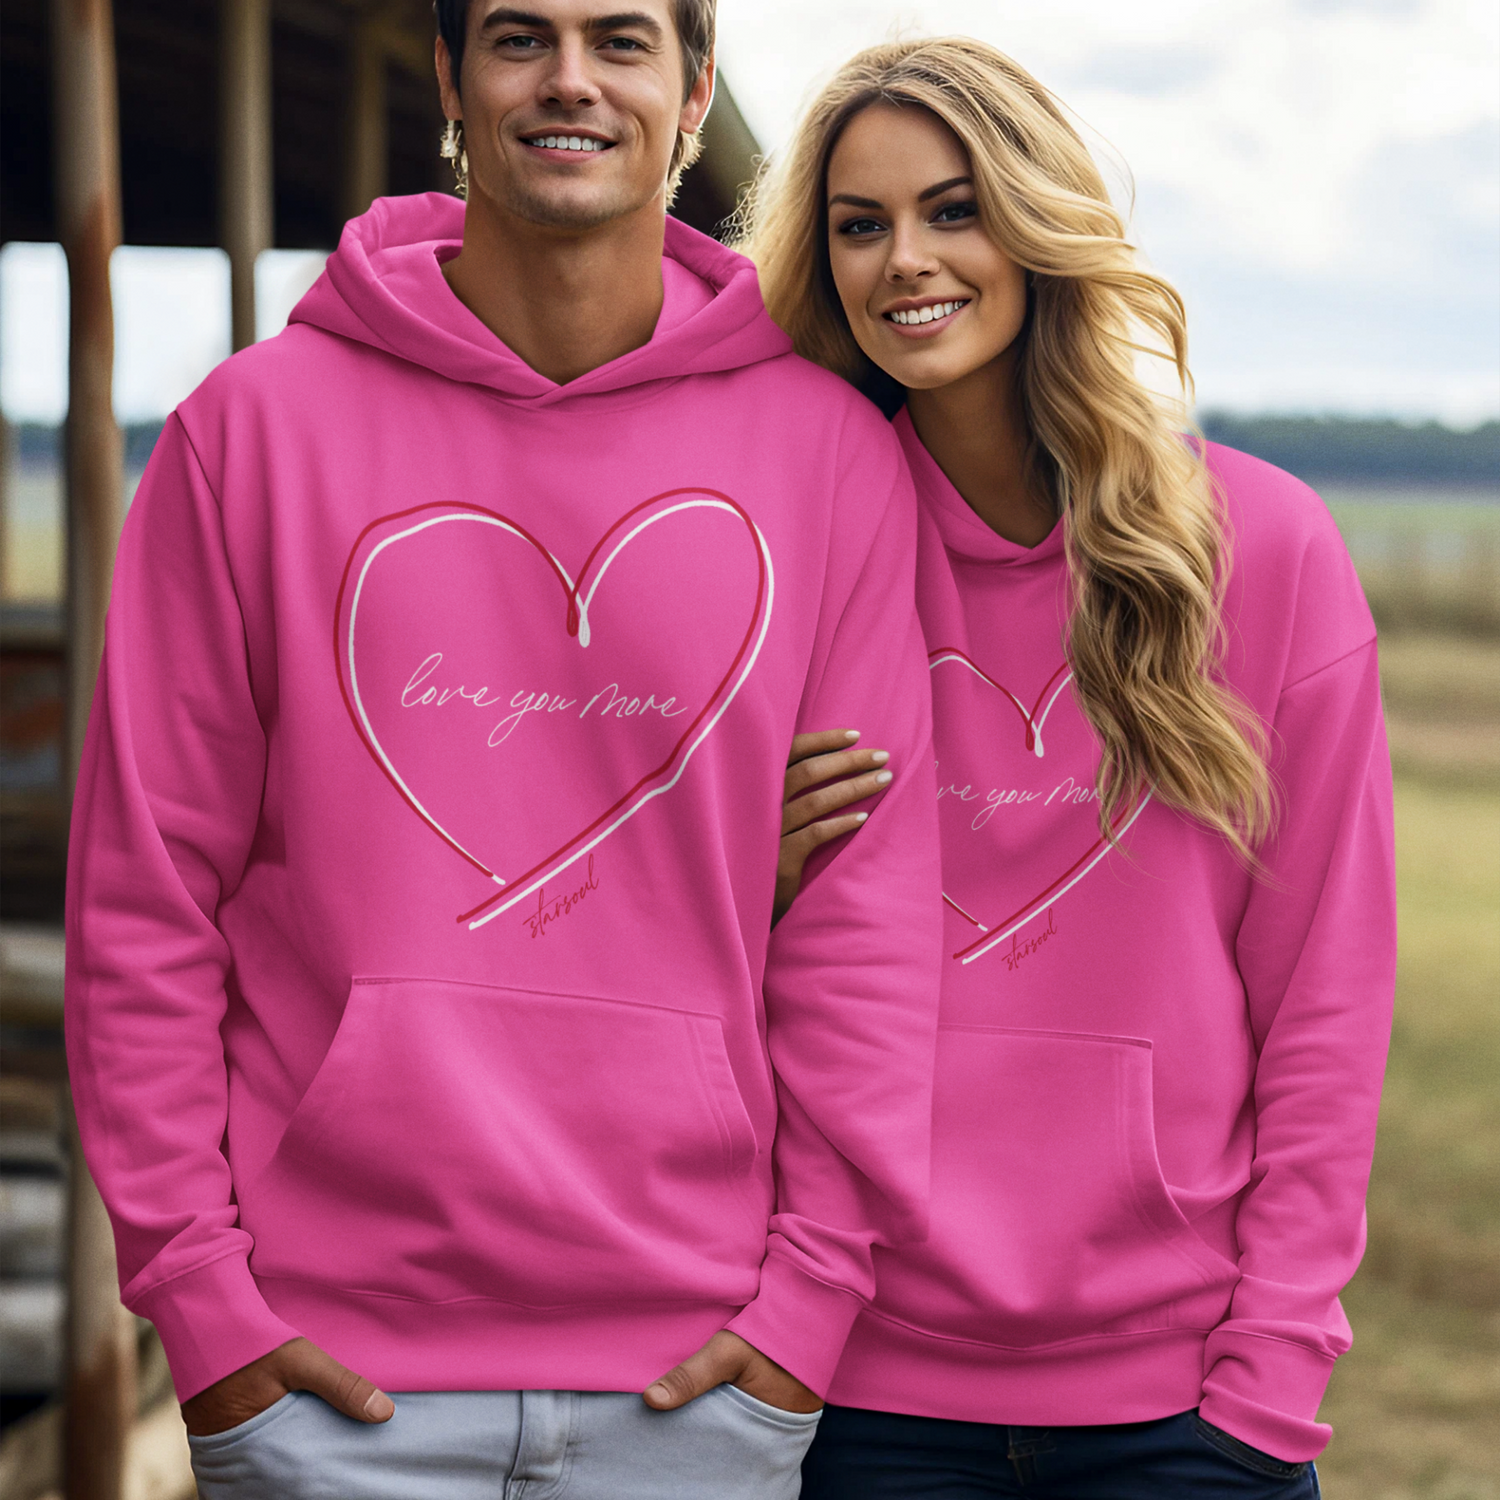 bright pink hoodie, with double red and white hearts and "love you more" benefitting heart disease